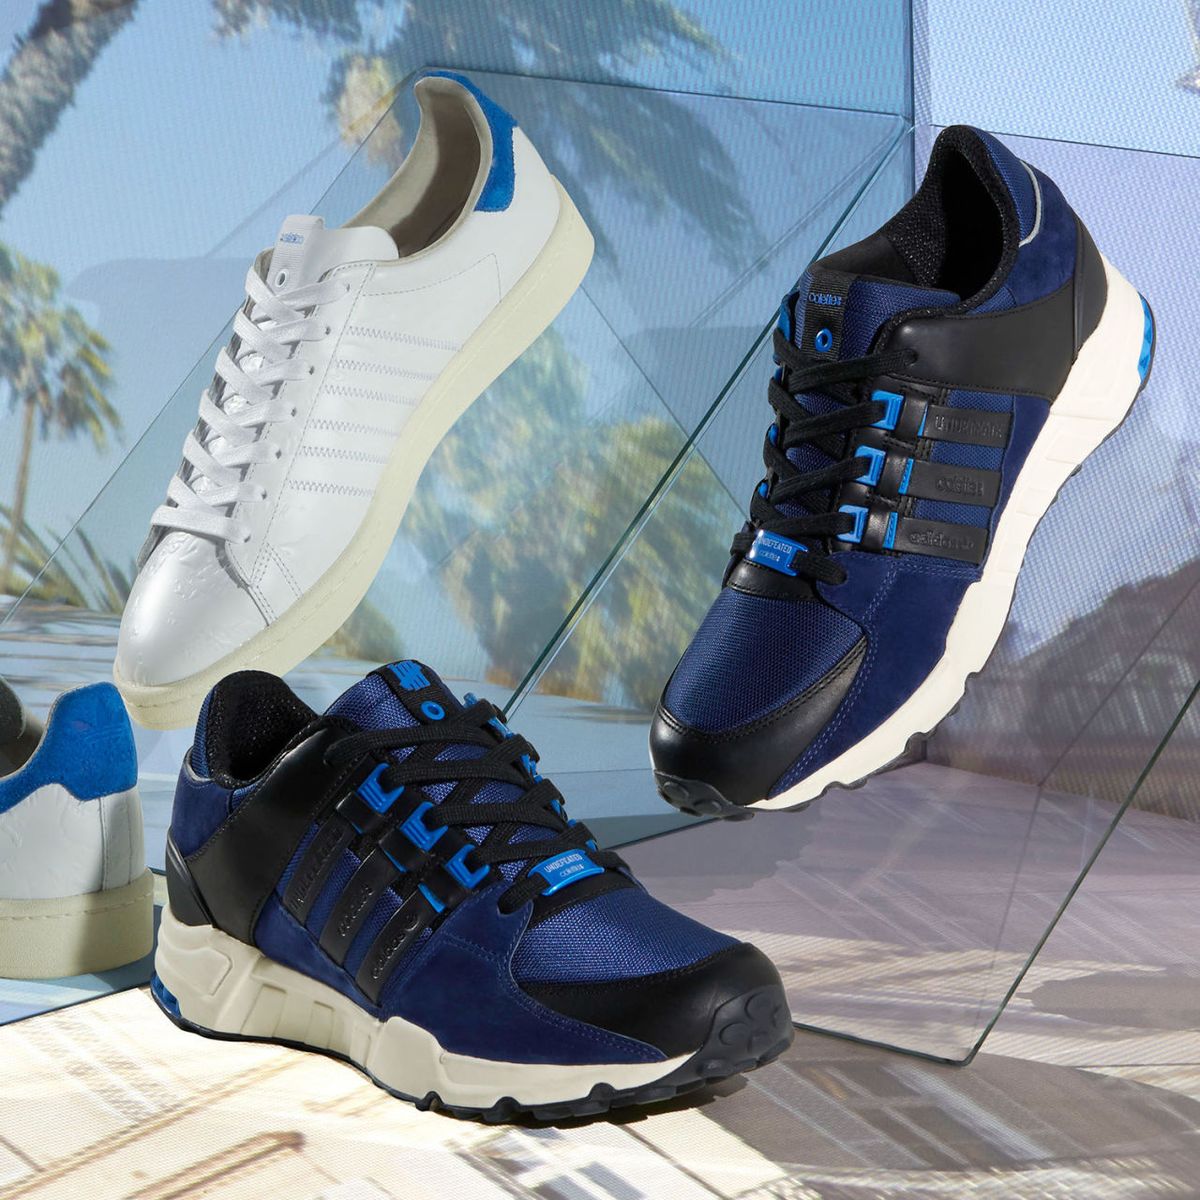 Rundt om Underholde Høring Adidas Consortium Colette x Undefeated Sneakers - Where to Buy the Adidas  EQT Support and Campus 80